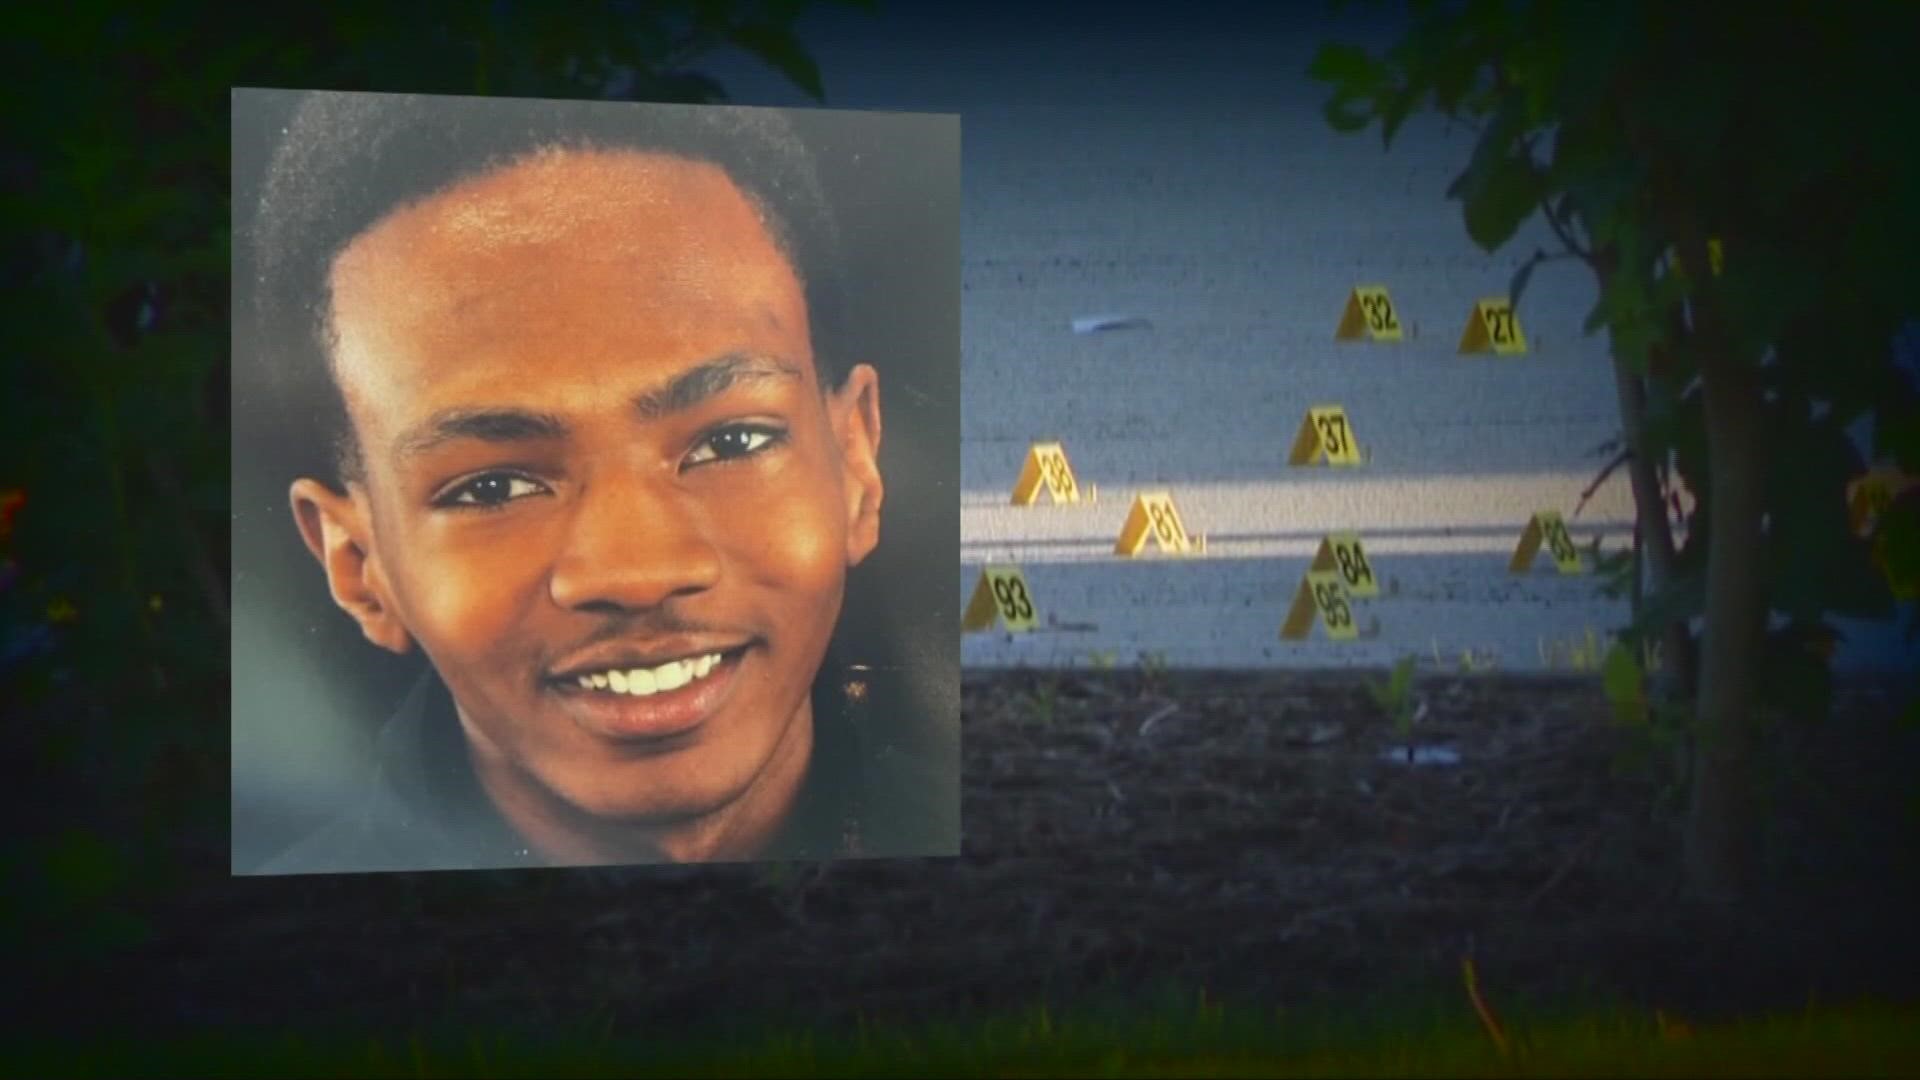 The press conference comes more than two months after Walker, 25, was shot and killed by eight Akron officers amid an overnight chase.